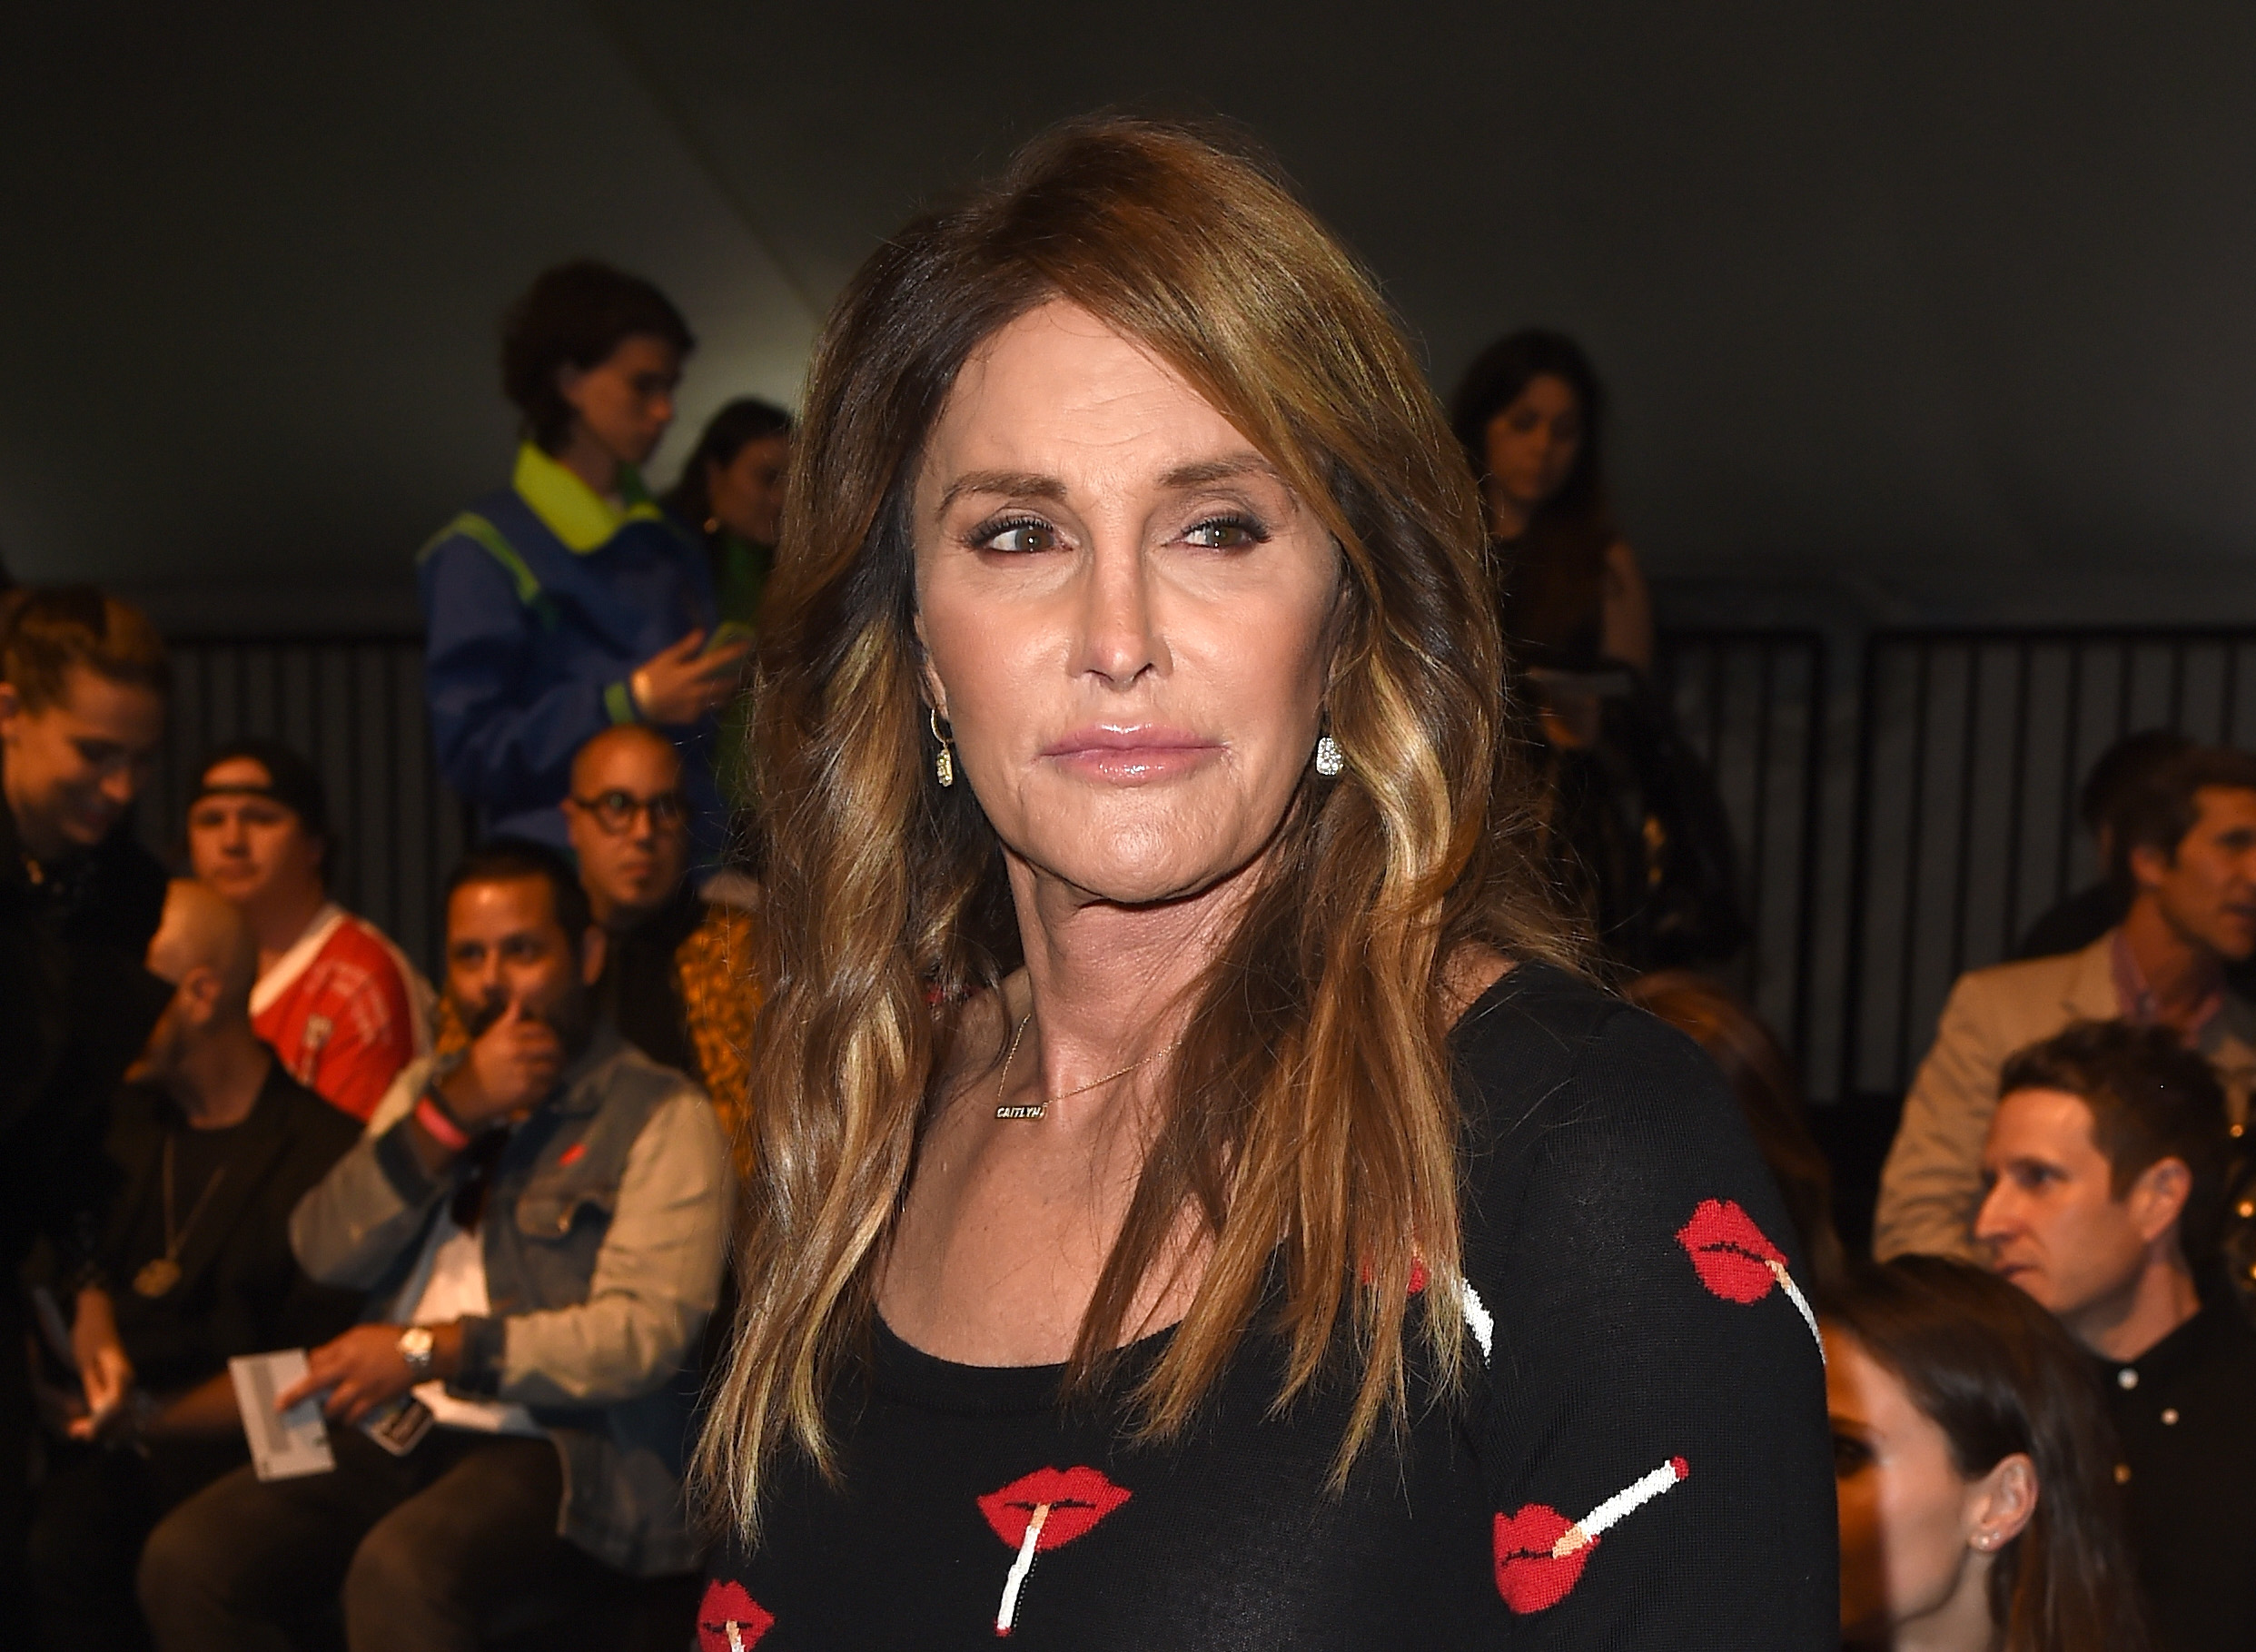 Caitlyn Jenner attends the Moschino Spring/Summer 17 Menswear and Women's Resort Collection during MADE LA at L.A. Live Event Deck on June 10, 2016 in Los Angeles, California.  (Photo by Kevin Winter/Getty Images) (Kevin Winter—Getty Images)